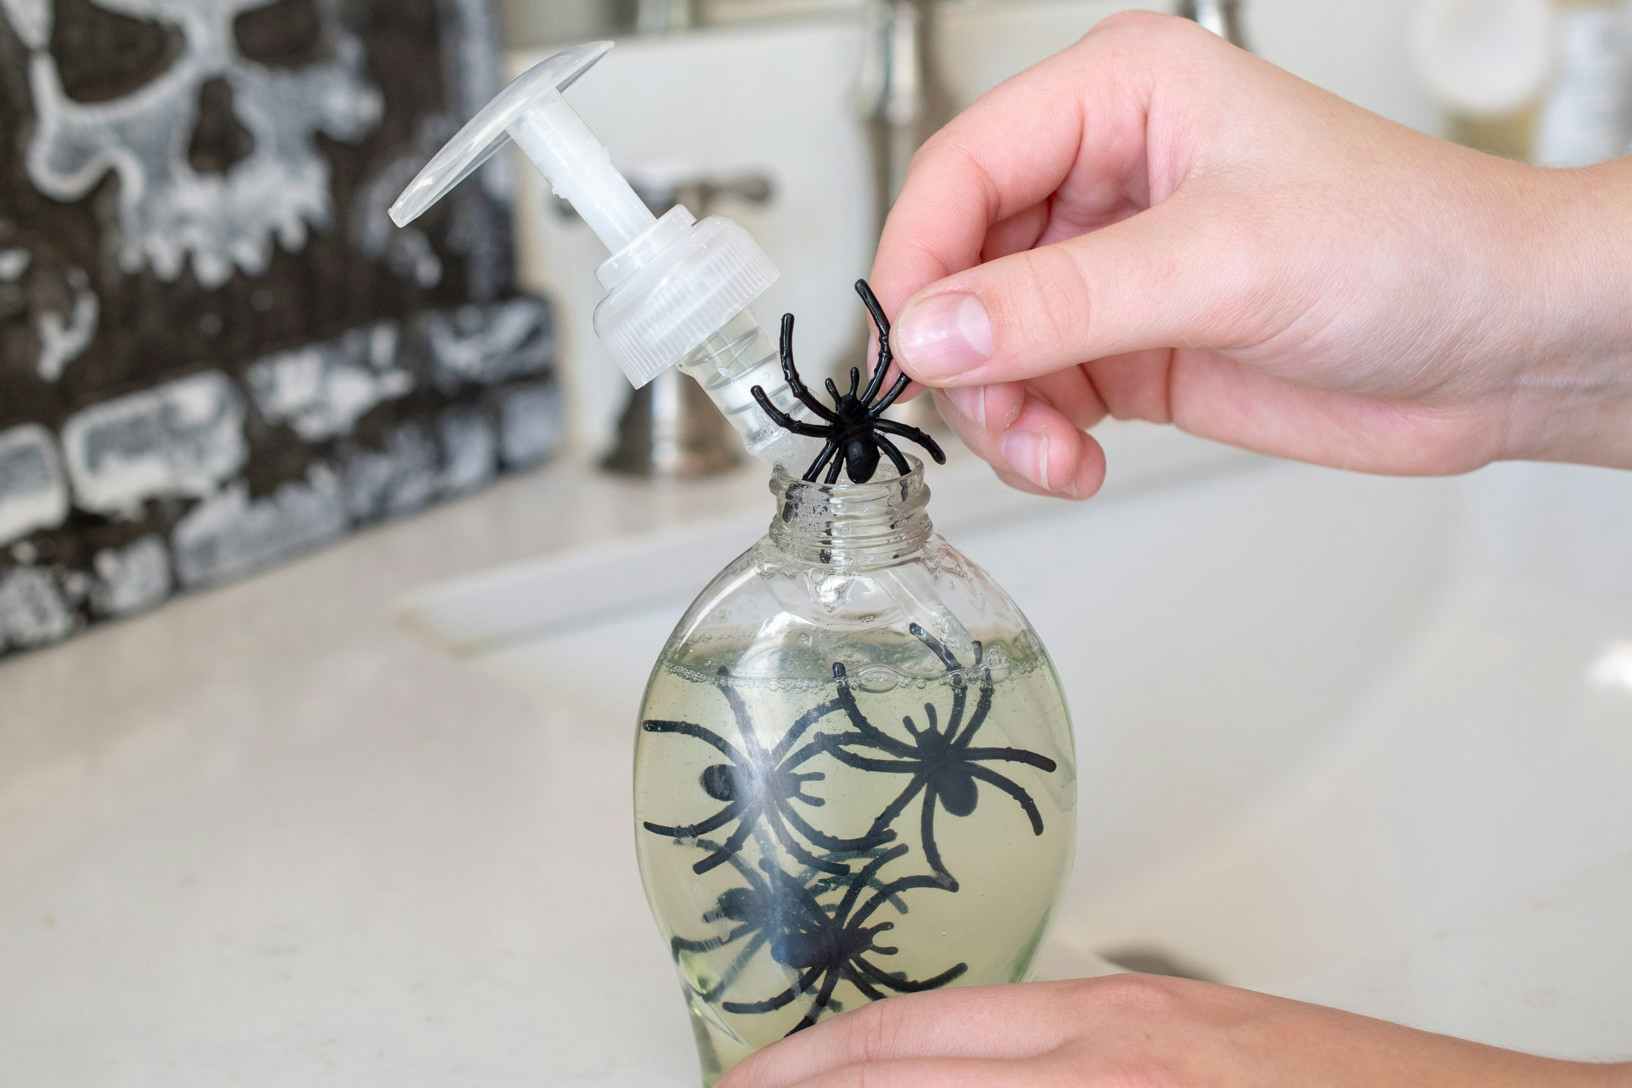 A person adding plastic spiders to a clear bottle of hand soap.